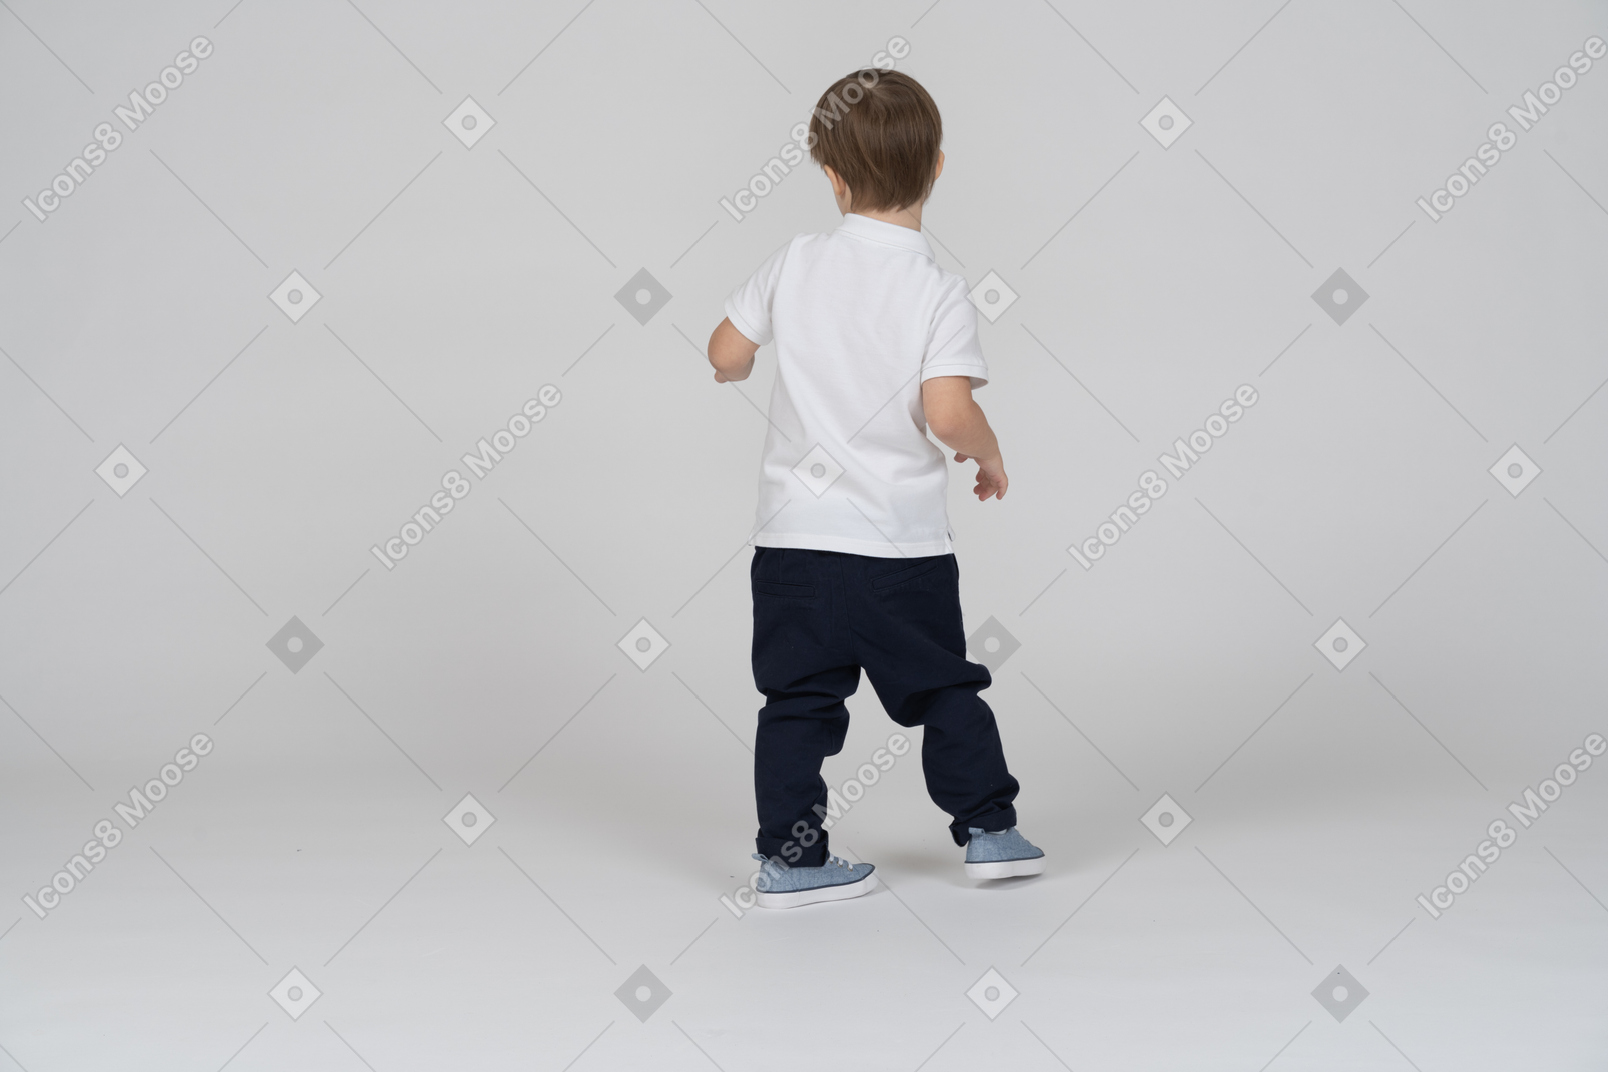 Back view of a boy stepping forward